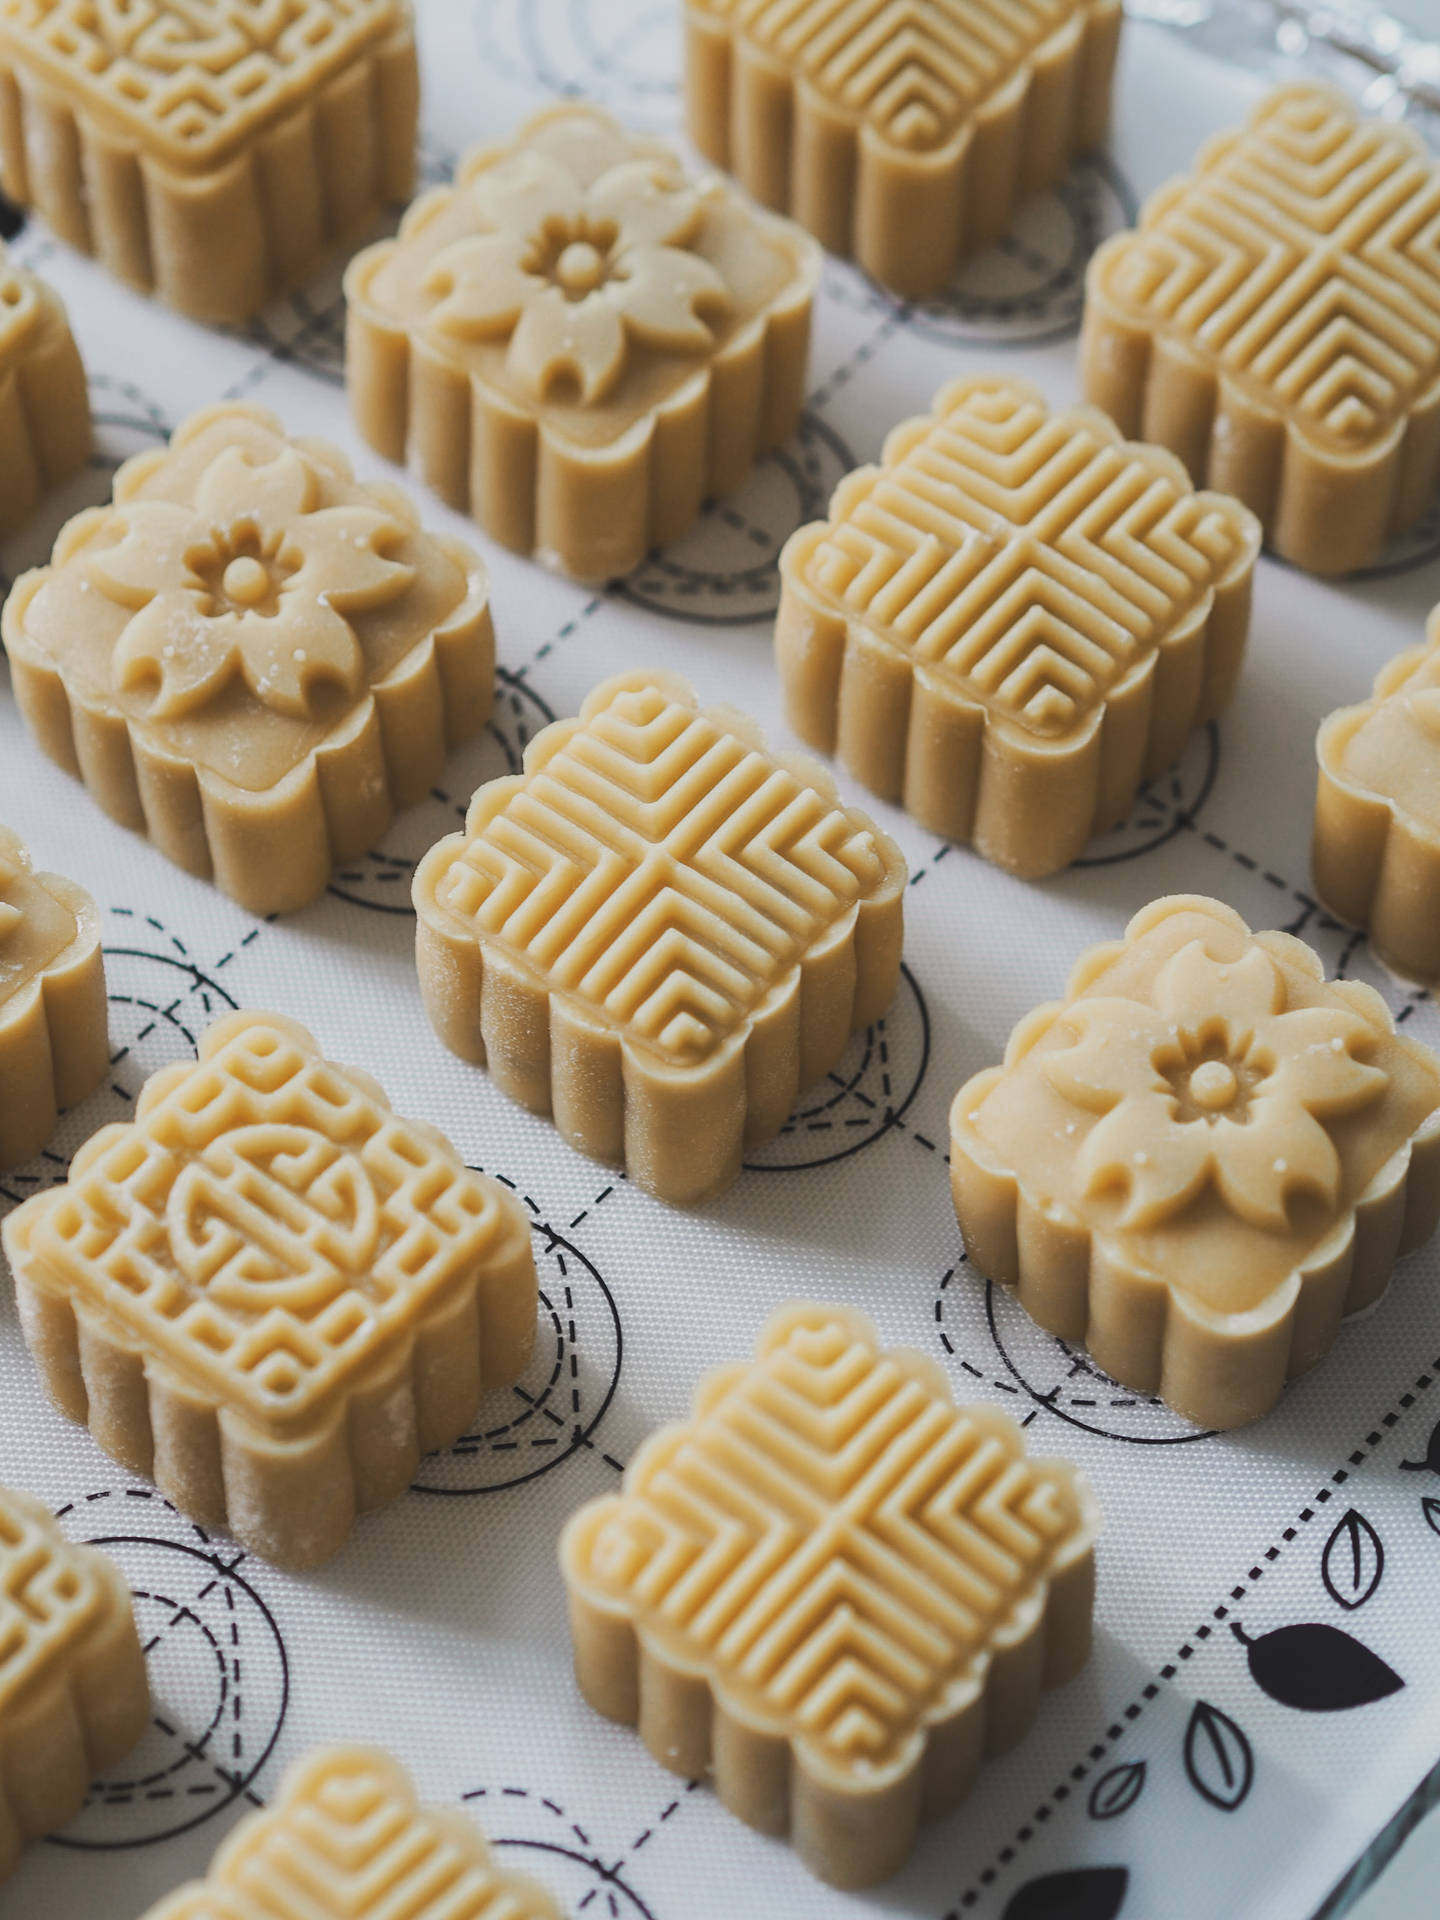 Patterned Square Mooncake Pastries Wallpaper